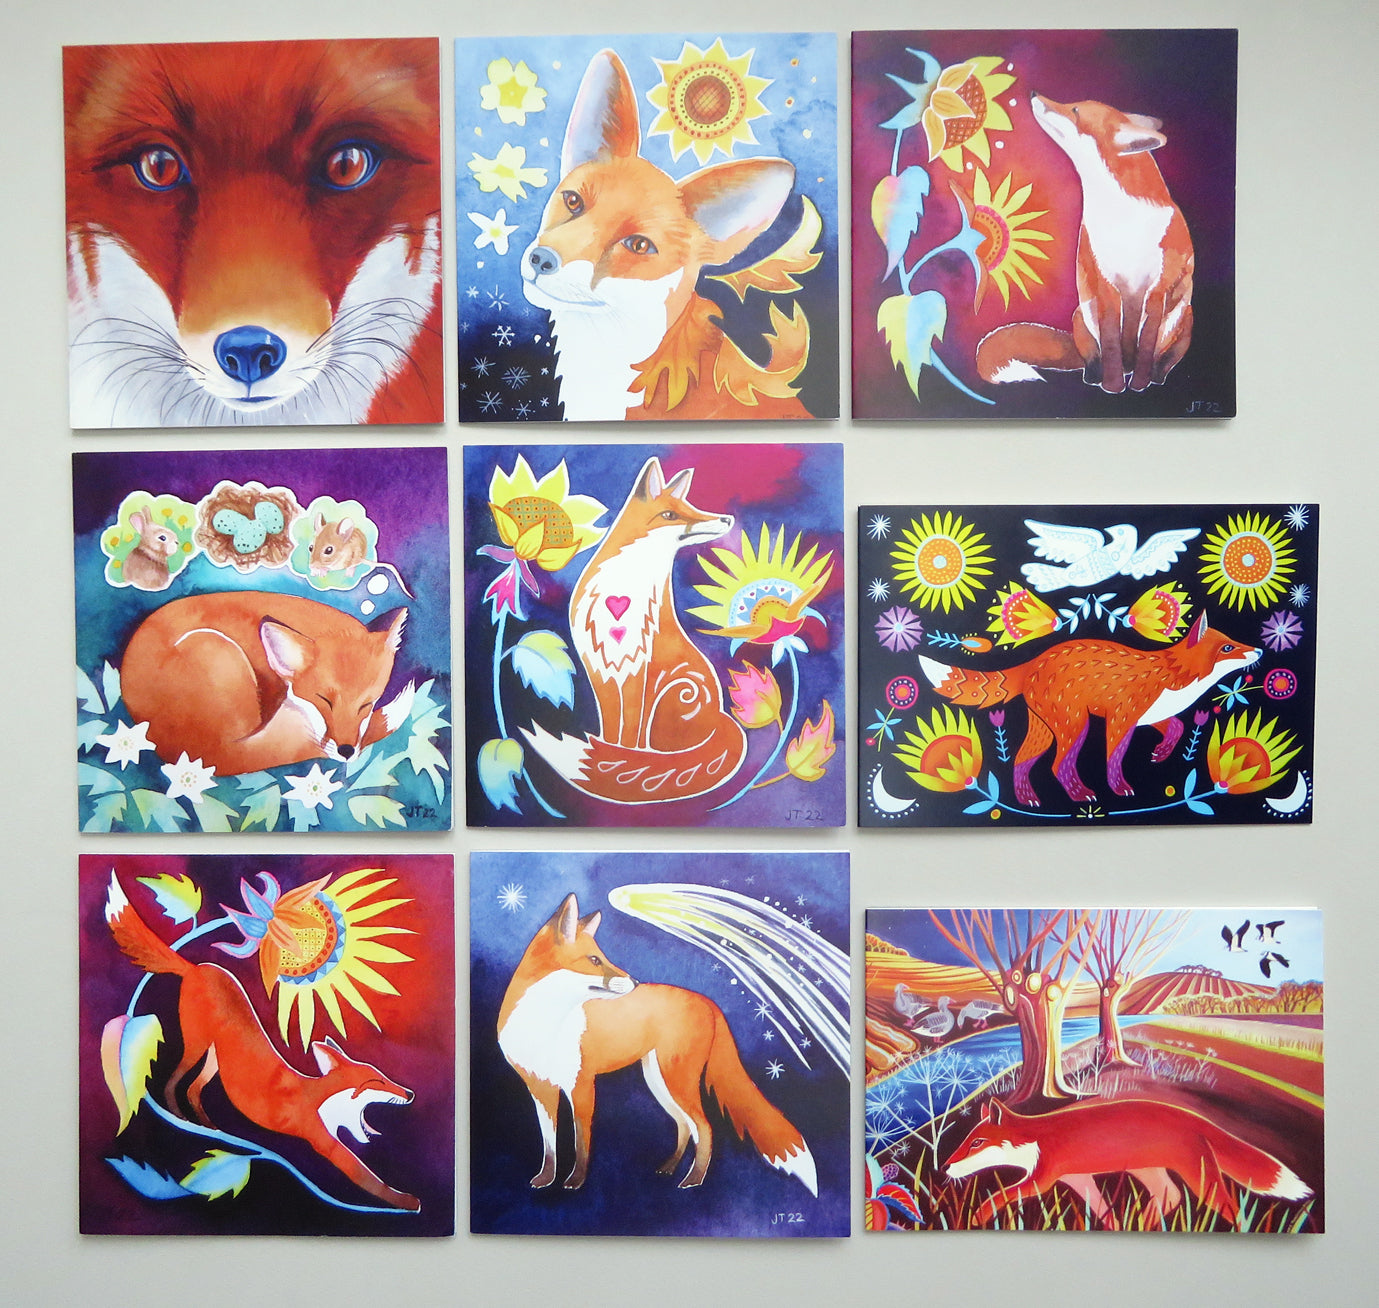 Fox greetings cards - choose from 9 designs